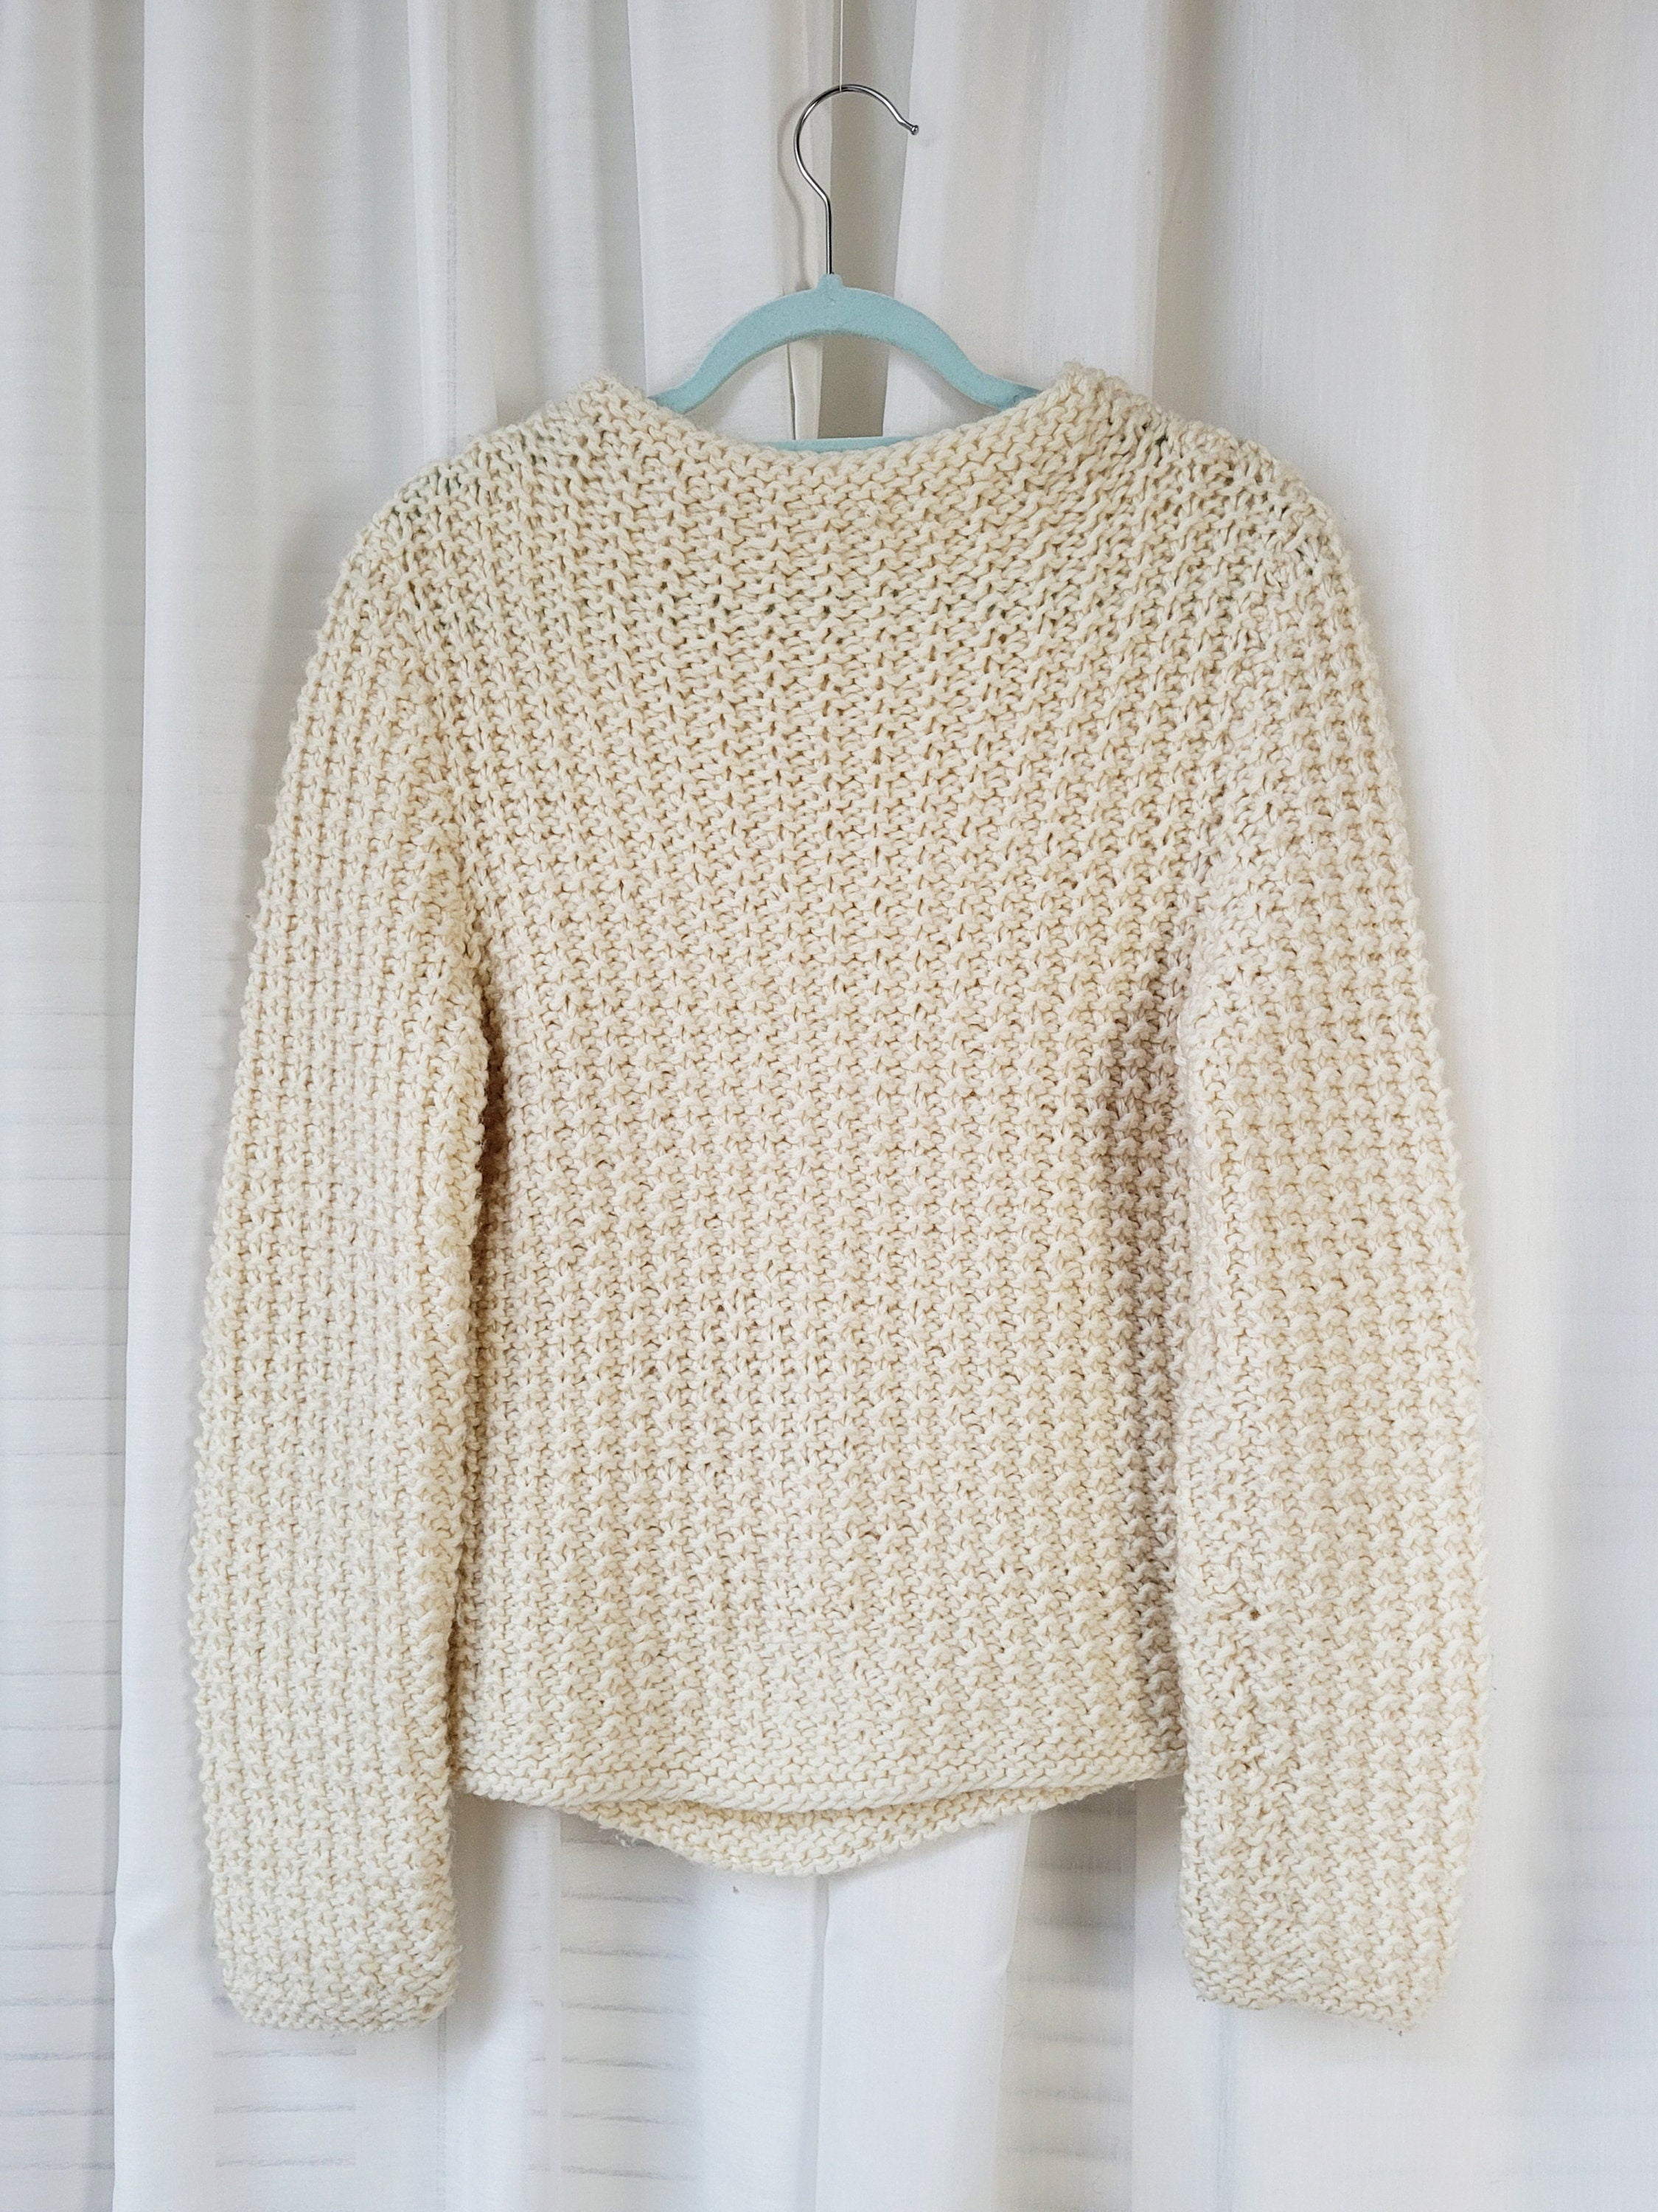 Vintage 80s cream handmade chunky knitted jumper top